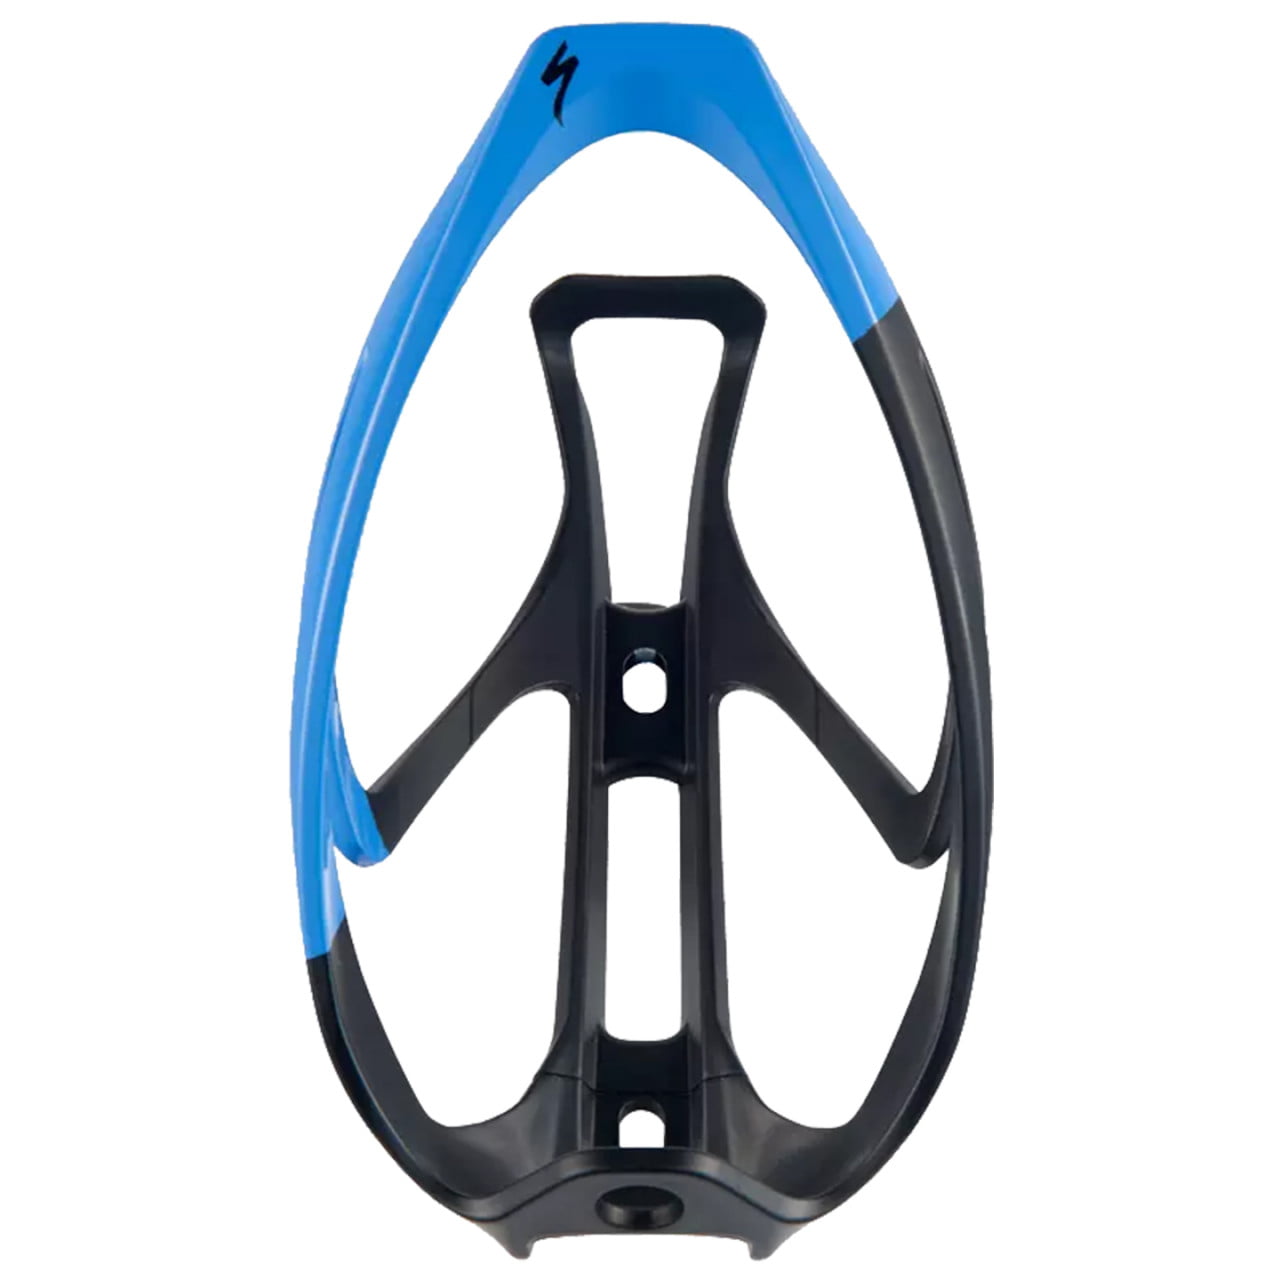 Rib Cage II Bottle Cage